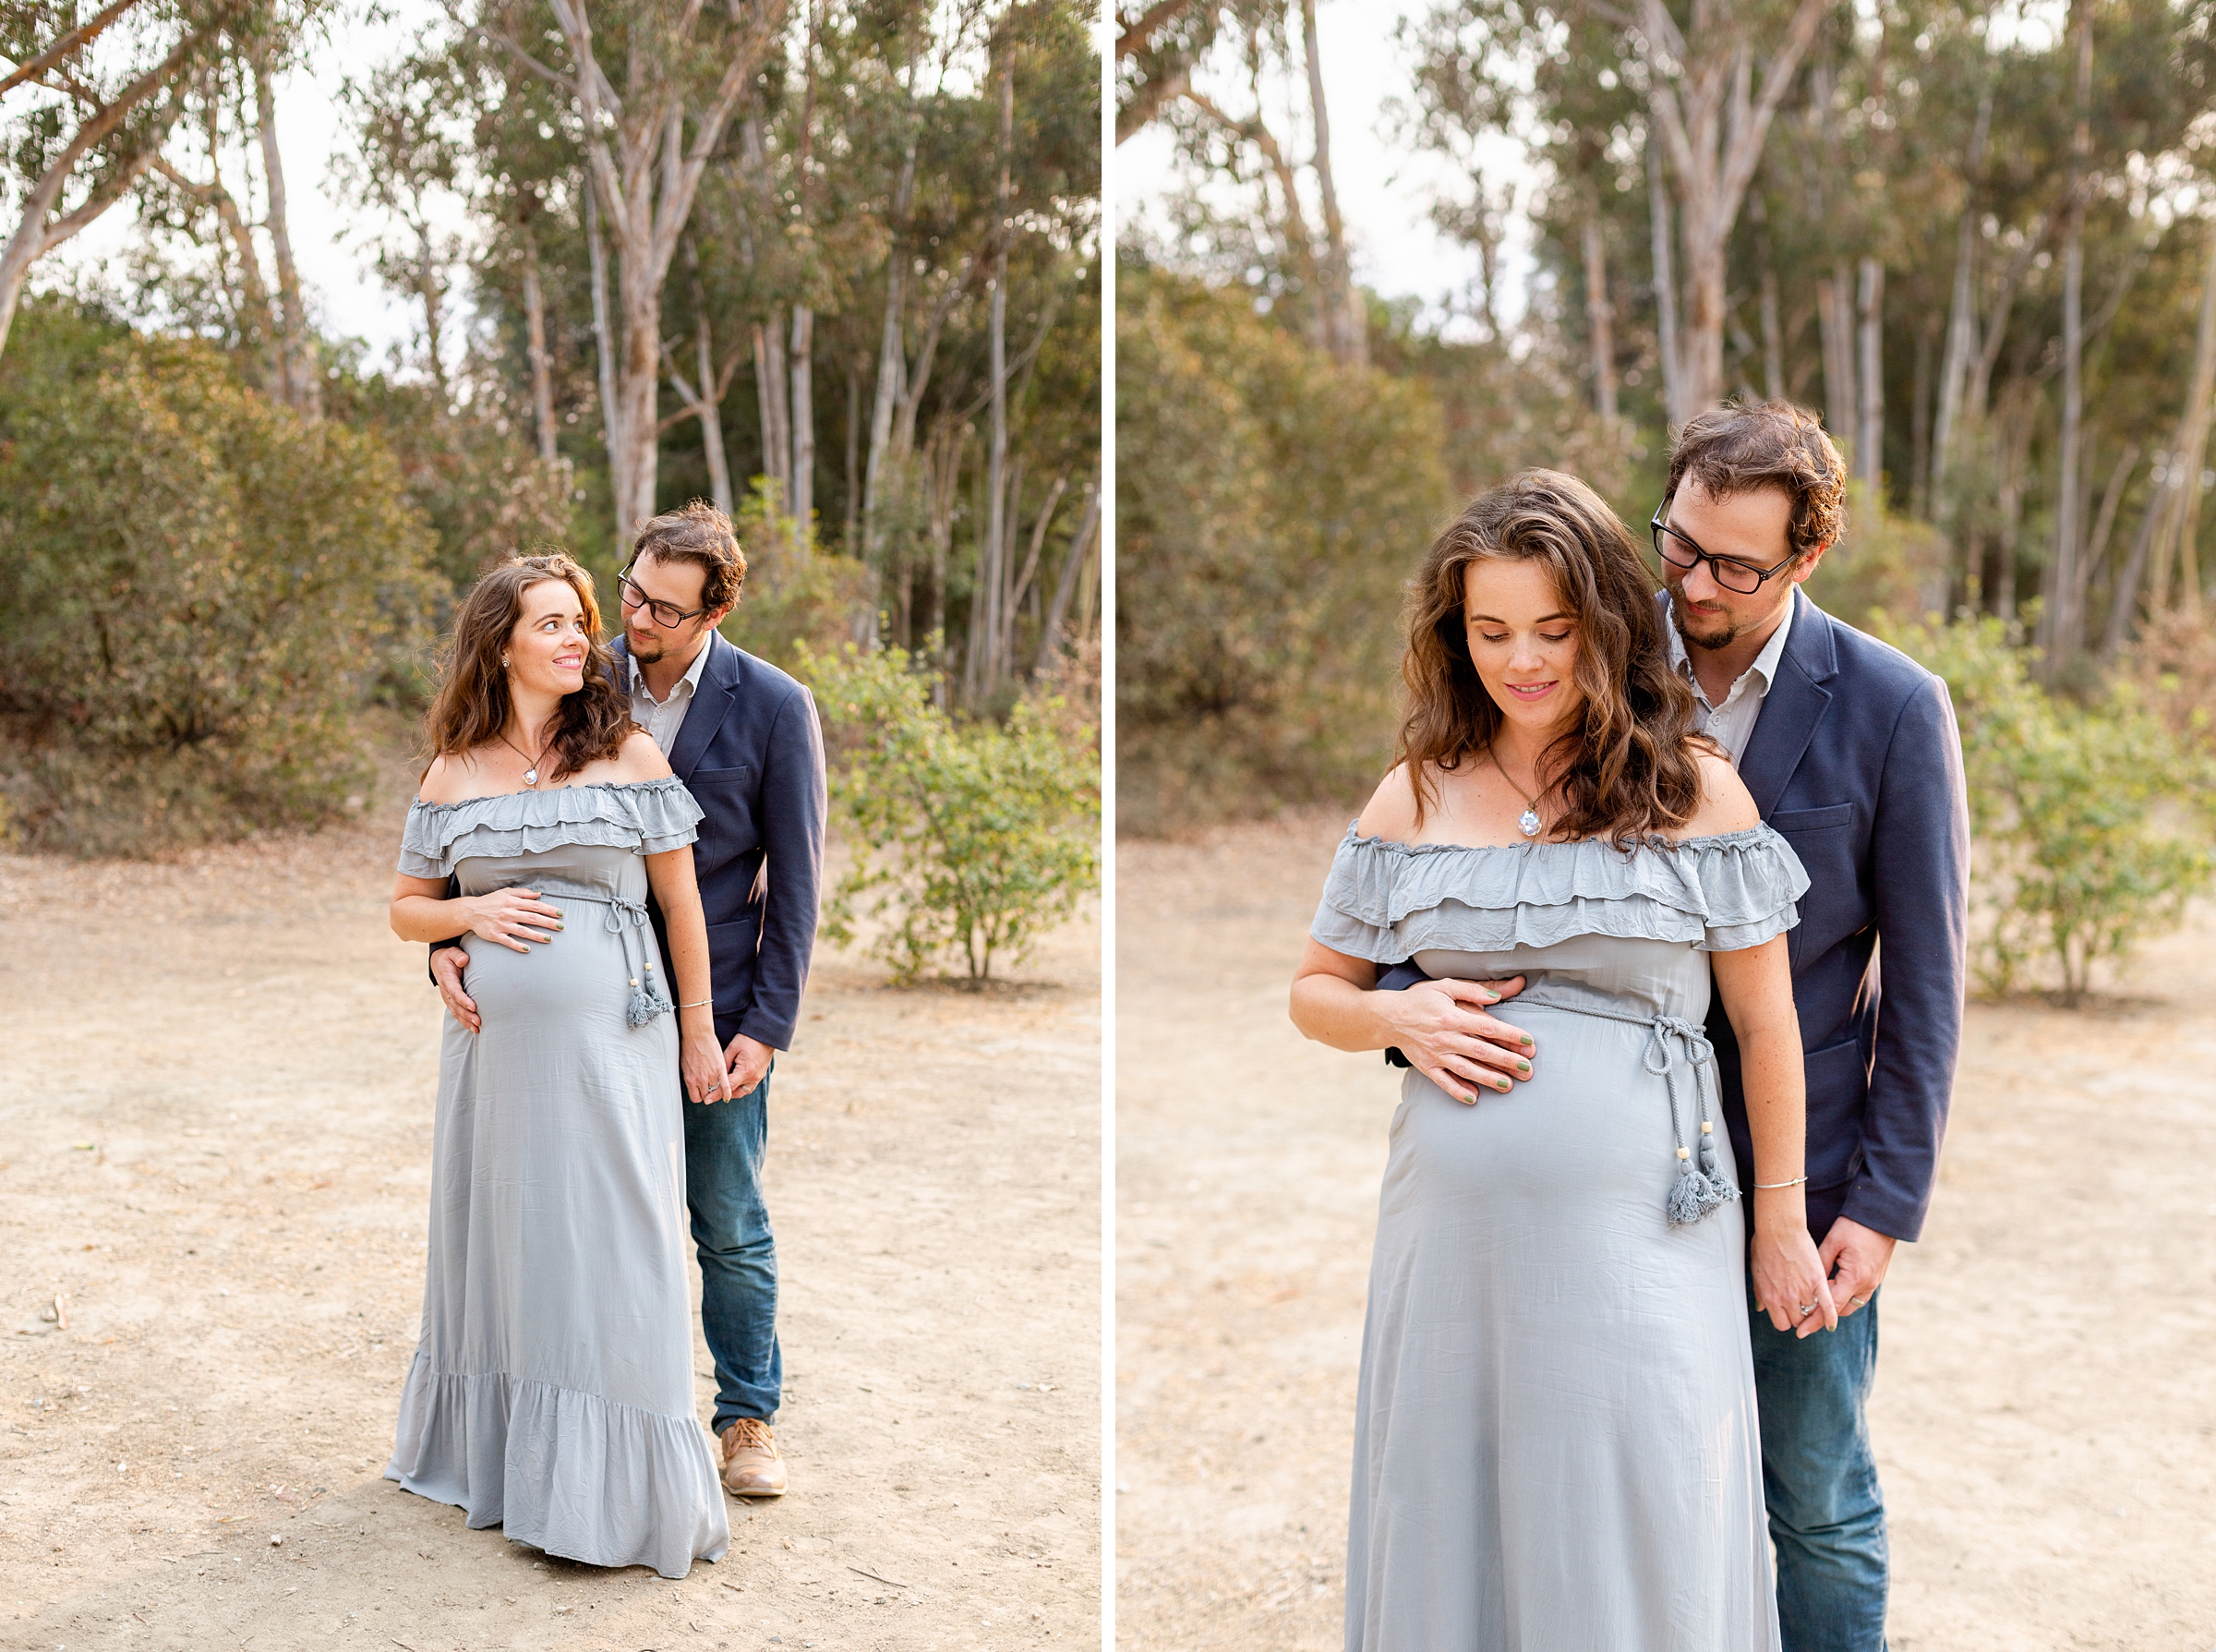 culver city maternity photography session in Los Angeles